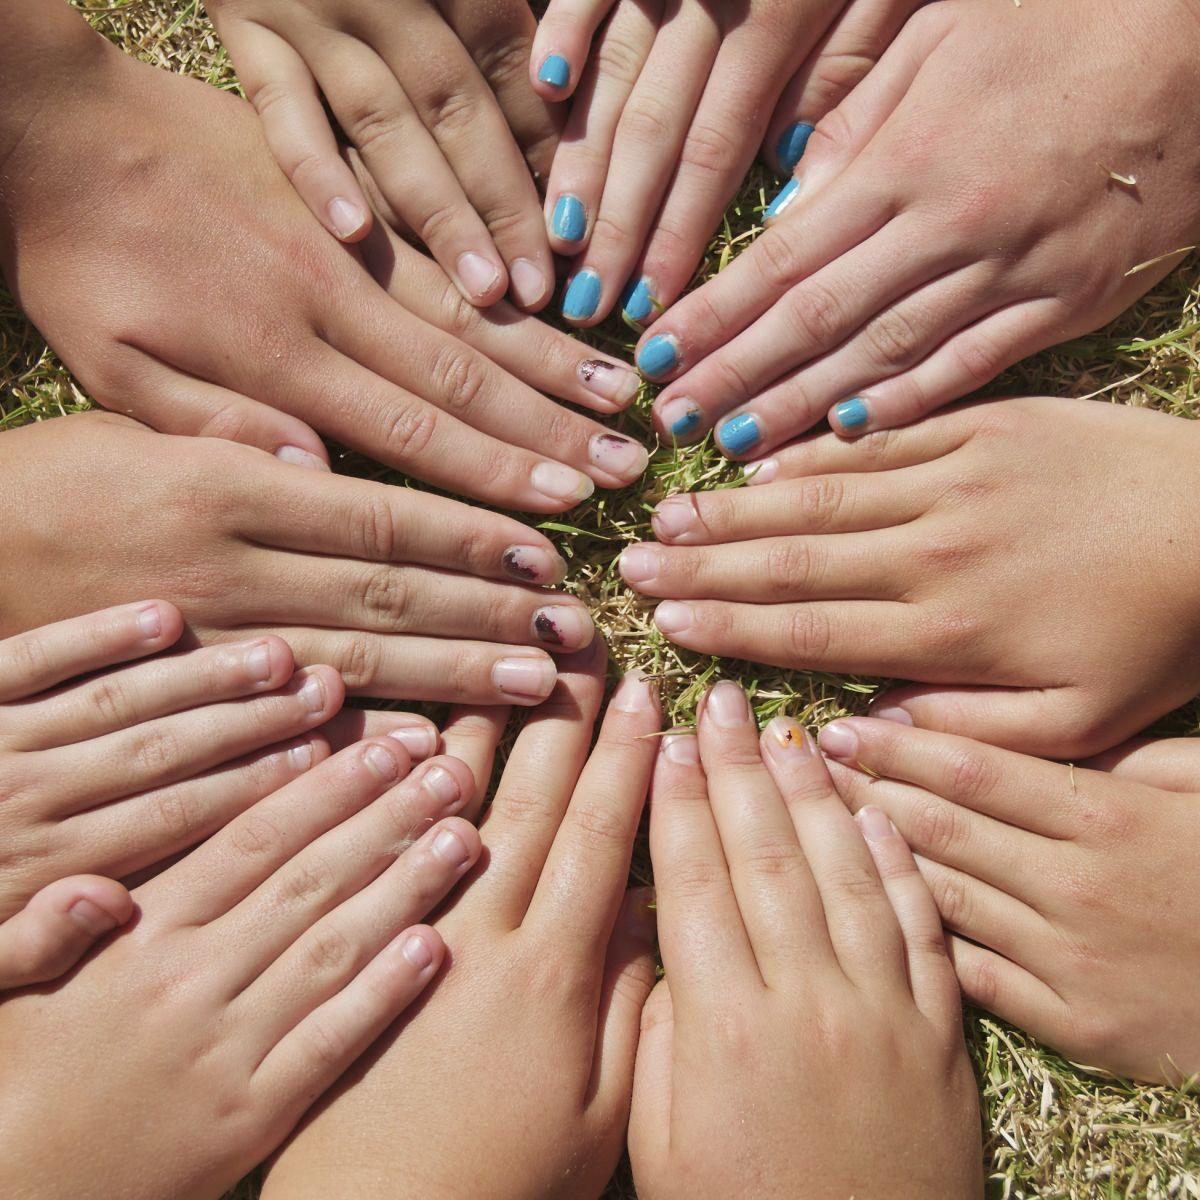 Hands in a circle on grass